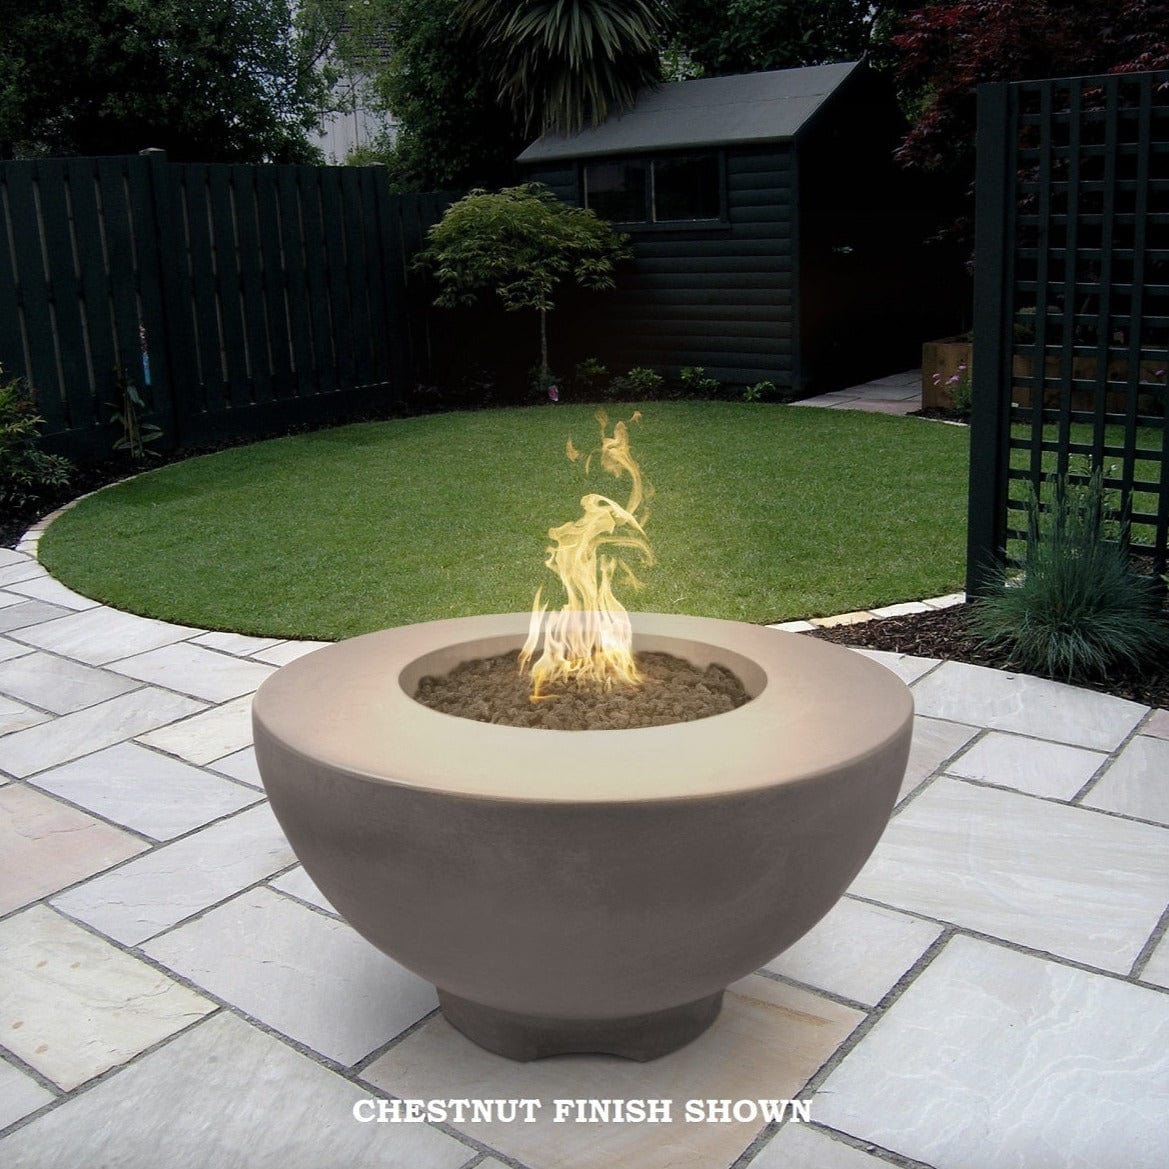 The Outdoor Plus Fire Features The Outdoor Plus 37&quot; Round Sienna Fire Pit in Metallic and Rustic Finishes / OPT-RF37, OPT-RF37FSML, OPT-RF37FSEN, OPT-RF37E12V, OPT-RF37EKIT